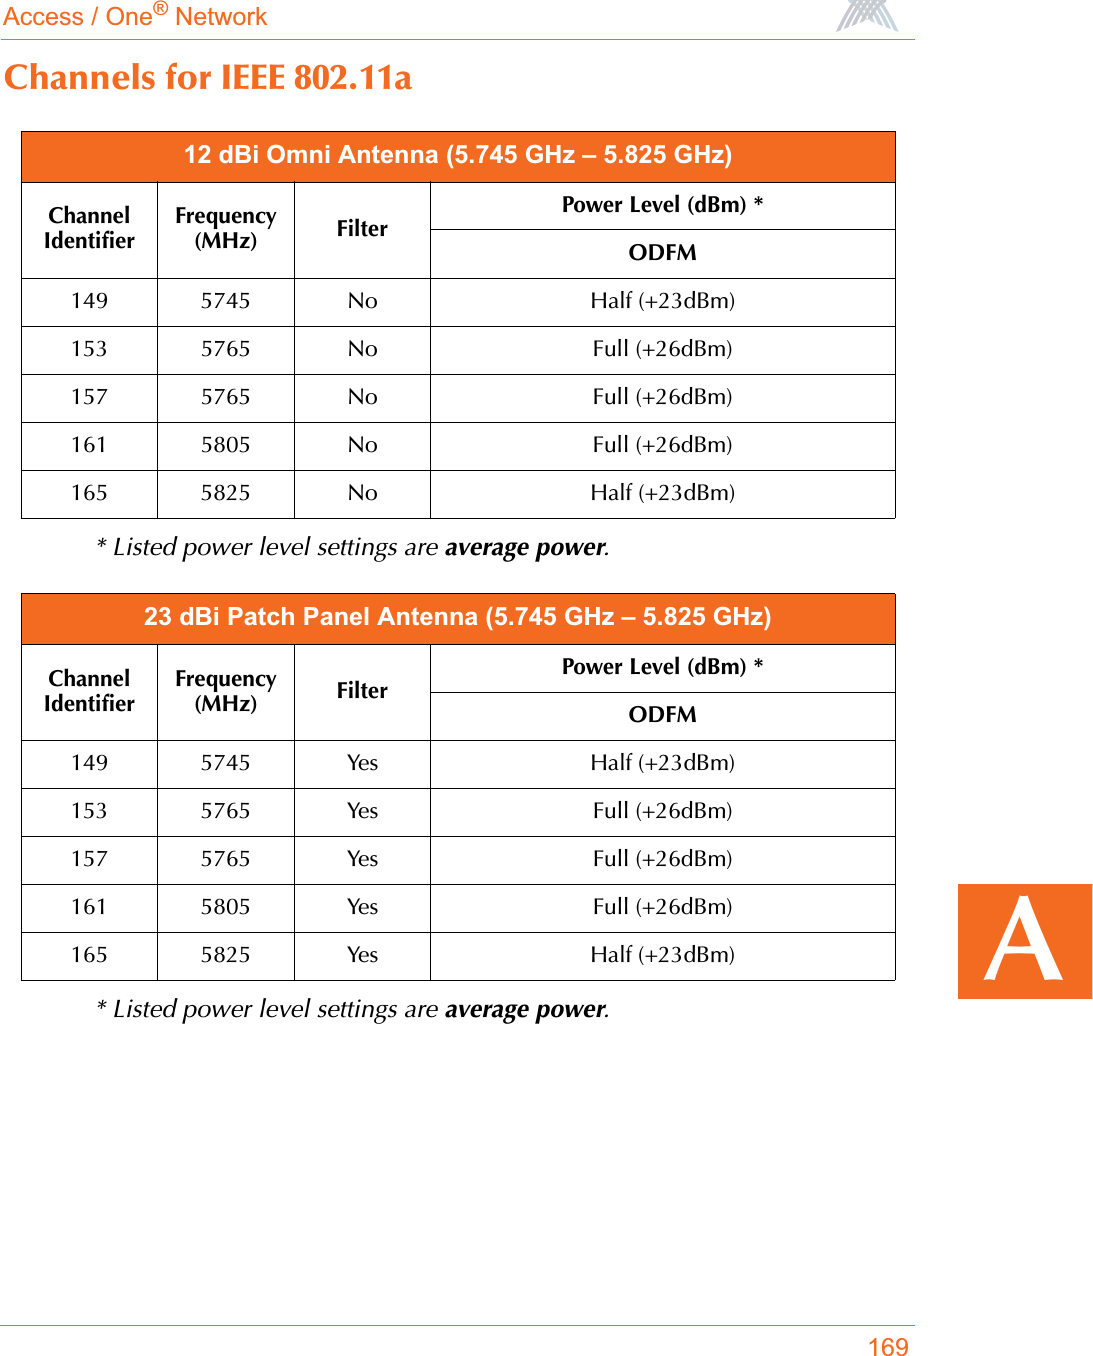 Access / One® Network169AChannels for IEEE 802.11a* Listed power level settings are average power.* Listed power level settings are average power.12 dBi Omni Antenna (5.745 GHz – 5.825 GHz)ChannelIdentifierFrequency (MHz) FilterPower Level (dBm) *ODFM149 5745 No Half (+23dBm)153 5765 No Full (+26dBm)157 5765 No Full (+26dBm)161 5805 No Full (+26dBm)165 5825 No Half (+23dBm)23 dBi Patch Panel Antenna (5.745 GHz – 5.825 GHz)ChannelIdentifierFrequency (MHz) FilterPower Level (dBm) *ODFM149 5745 Yes Half (+23dBm)153 5765 Yes Full (+26dBm)157 5765 Yes Full (+26dBm)161 5805 Yes Full (+26dBm)165 5825 Yes Half (+23dBm)